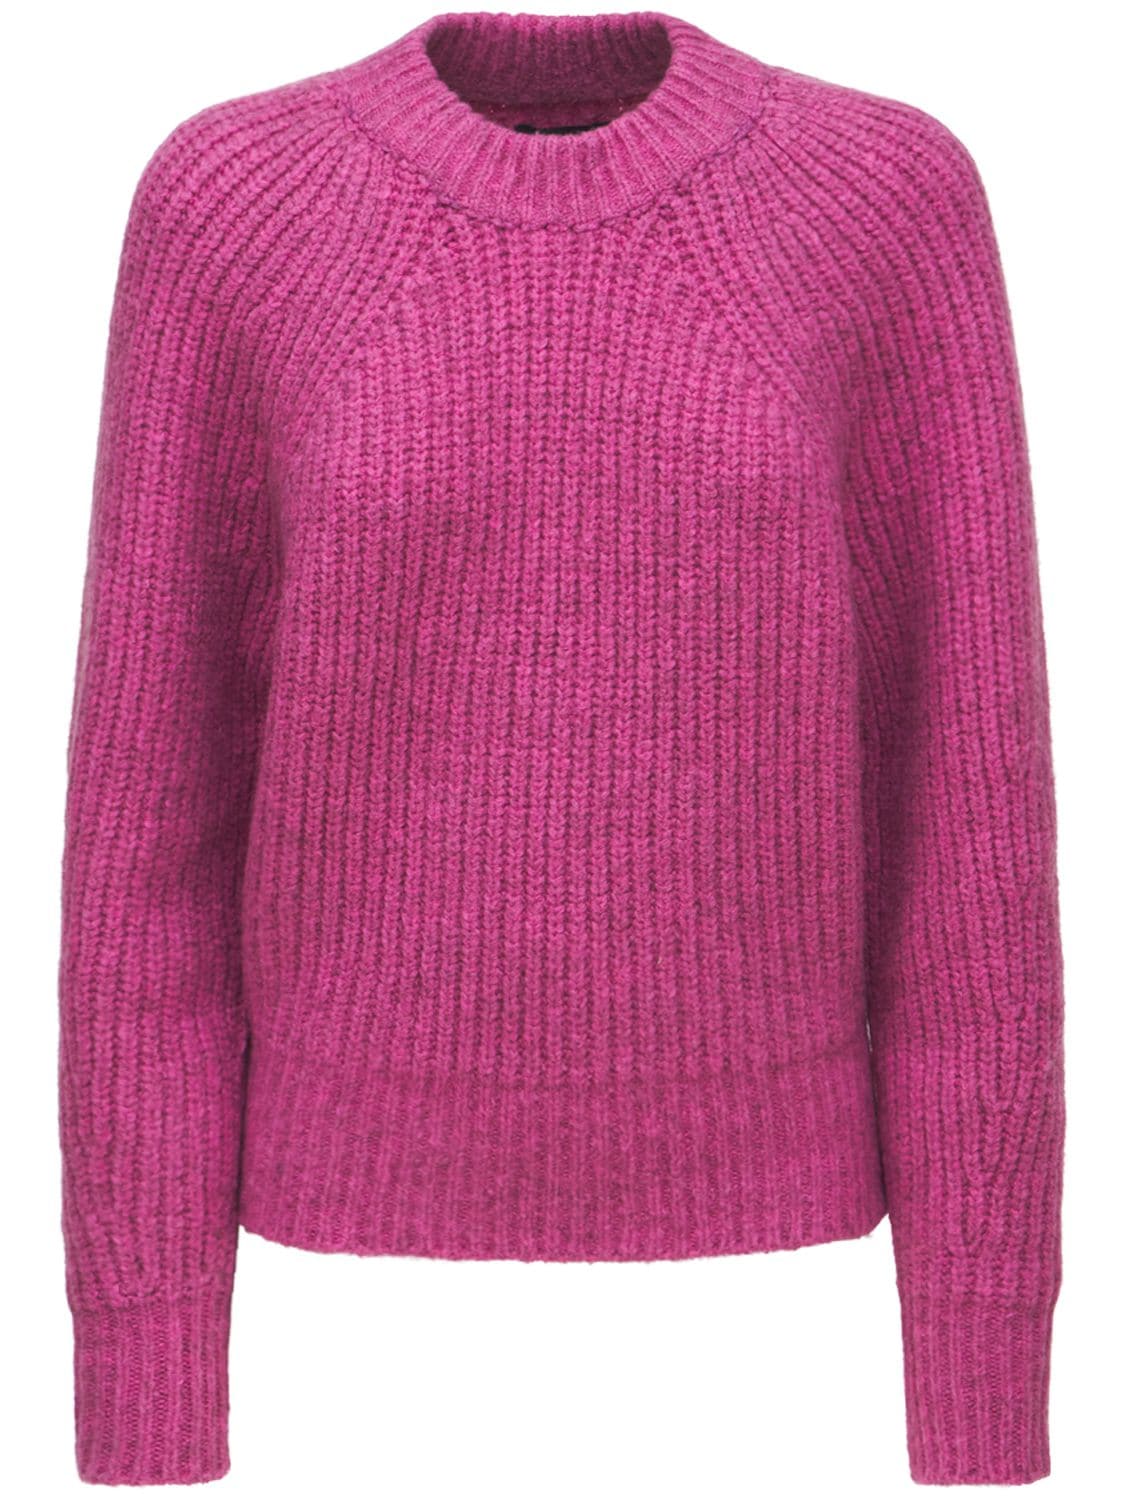 Rosy Fluffy Cotton Blend Knit Sweater